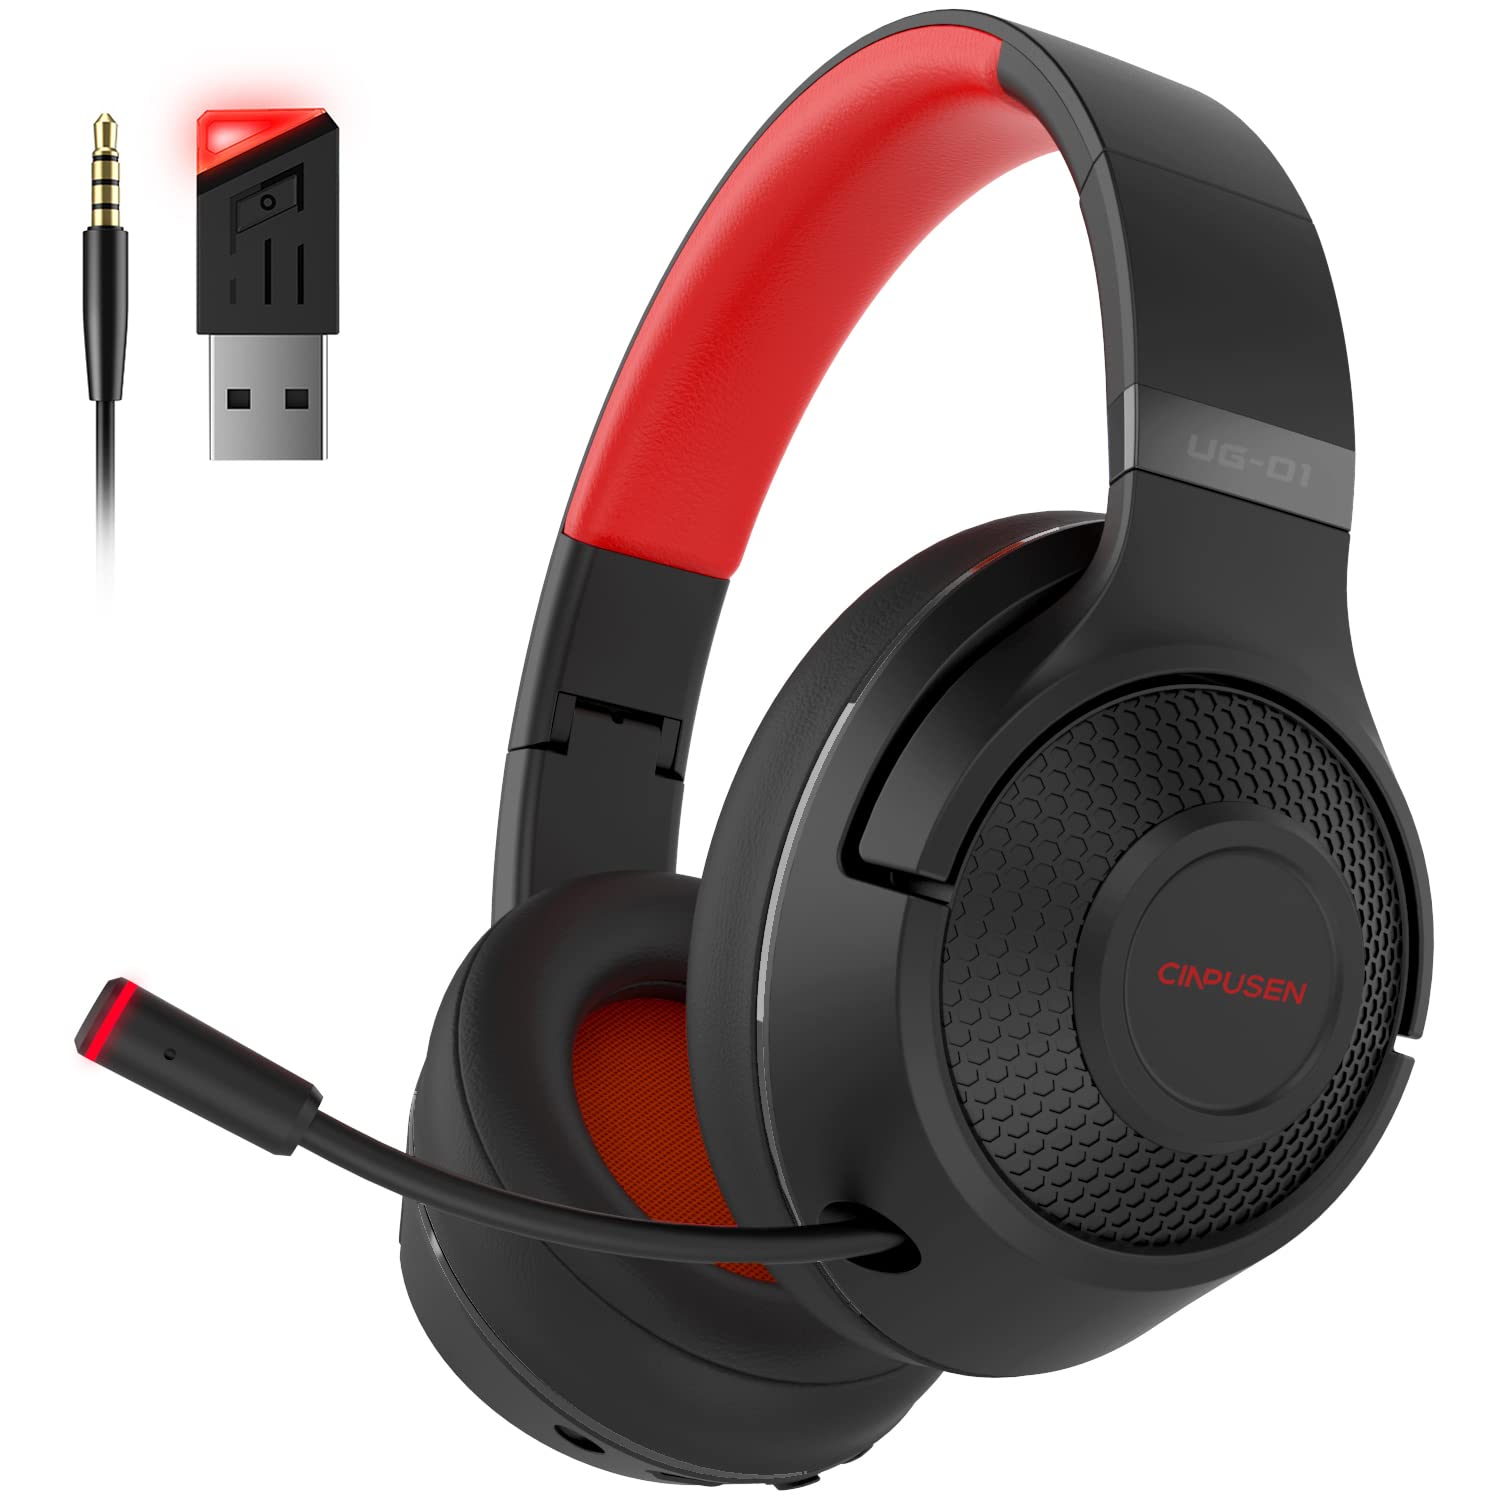 2.4Ghz Wireless Gaming Headset for PC, PS5, PS4, MacBook, with Microphone, Over-Ear Bluetooth Headphones for Cell Phone, Soft Earmuff - 40 Hours Playtime, Only Wired Mode for Xbox Series, Red - amzGamess